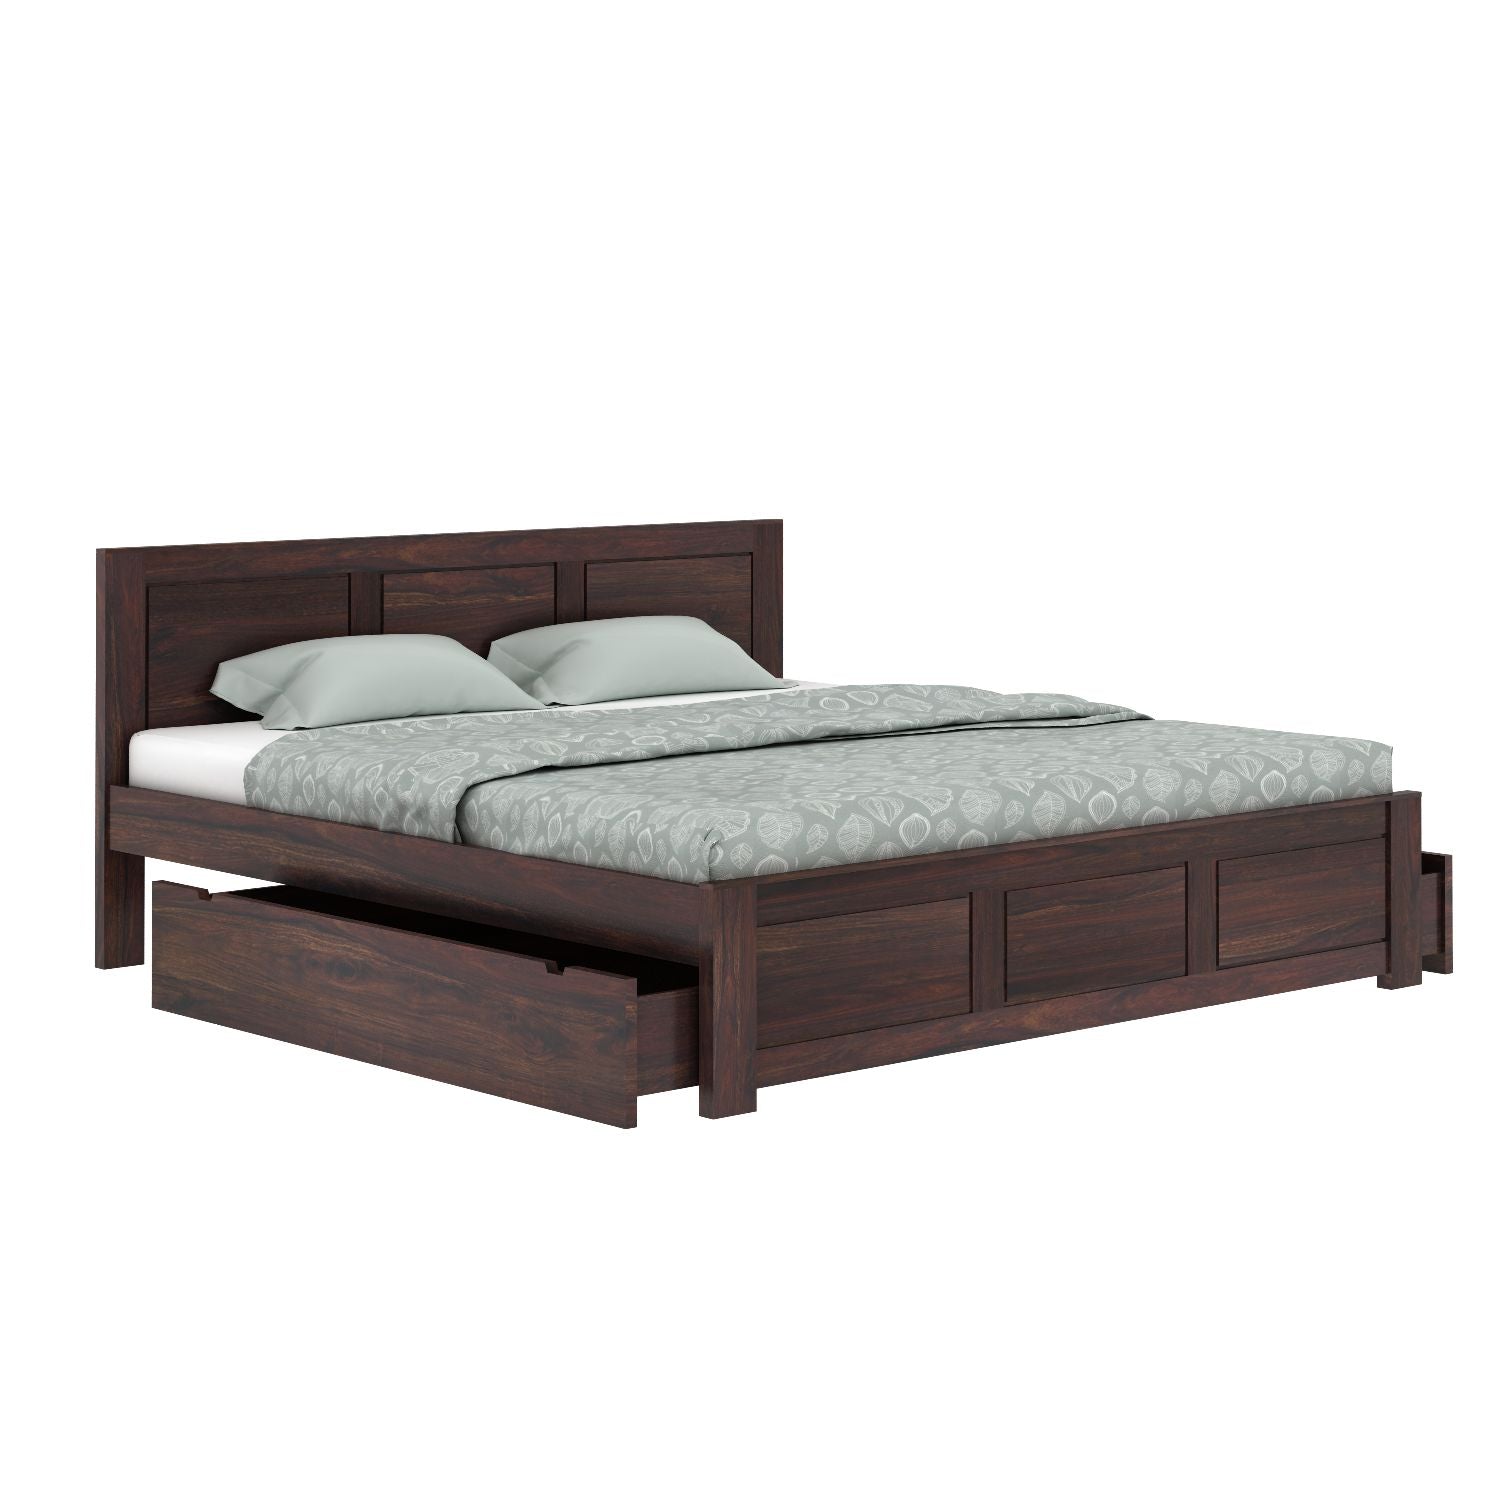 Woodwing Solid Sheesham Wood Bed With Two Drawers (Queen Size, Walnut Finish)